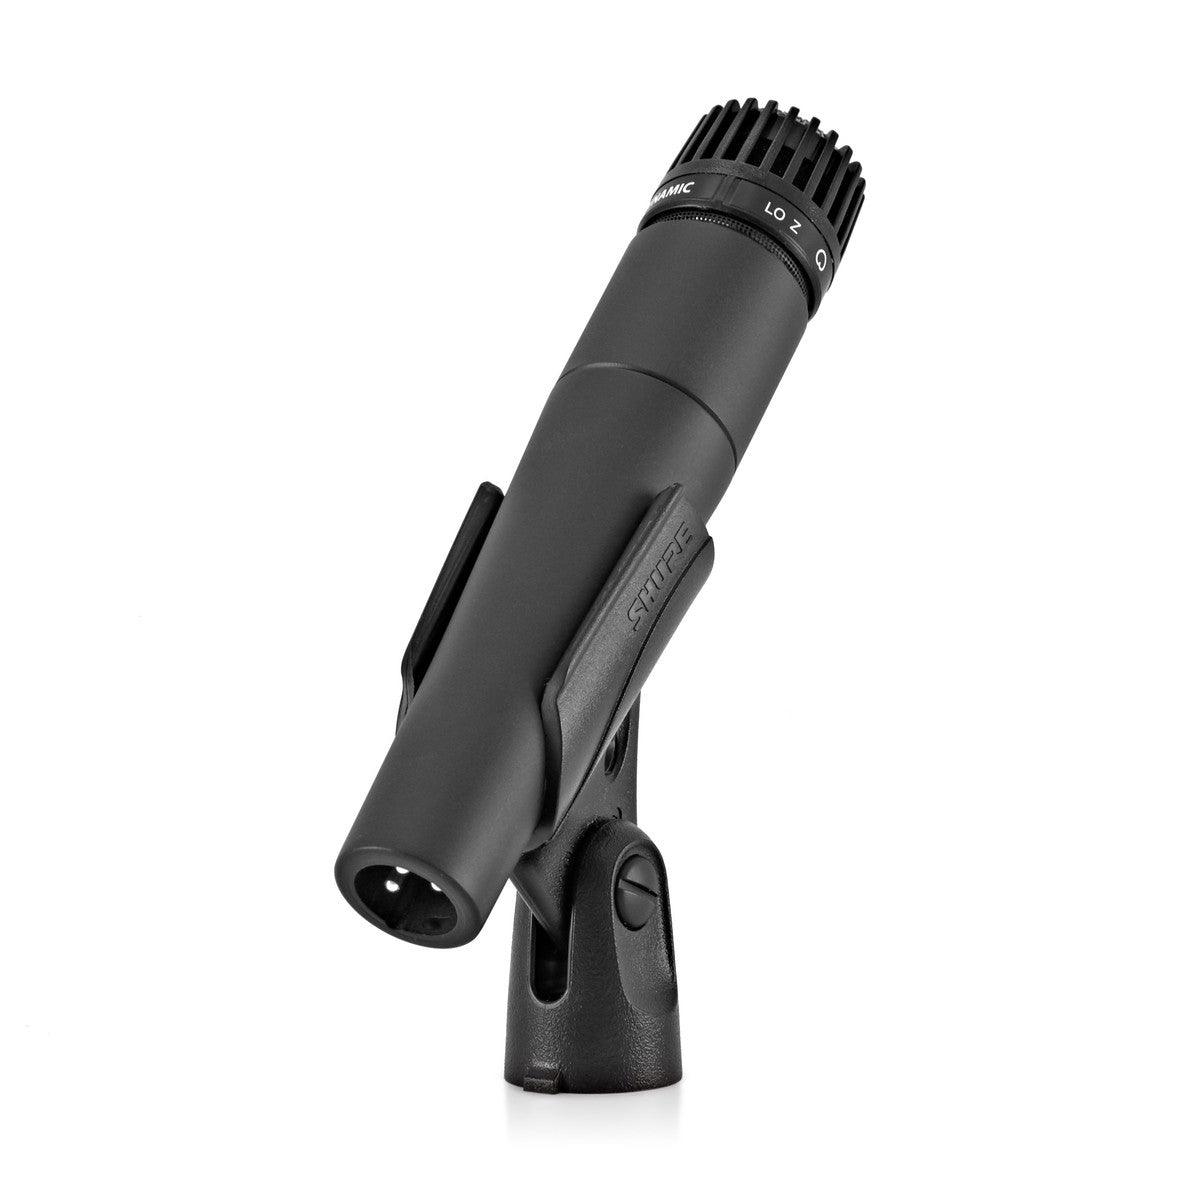 Shure SM57 Instrument Microphone - DY Pro Audio